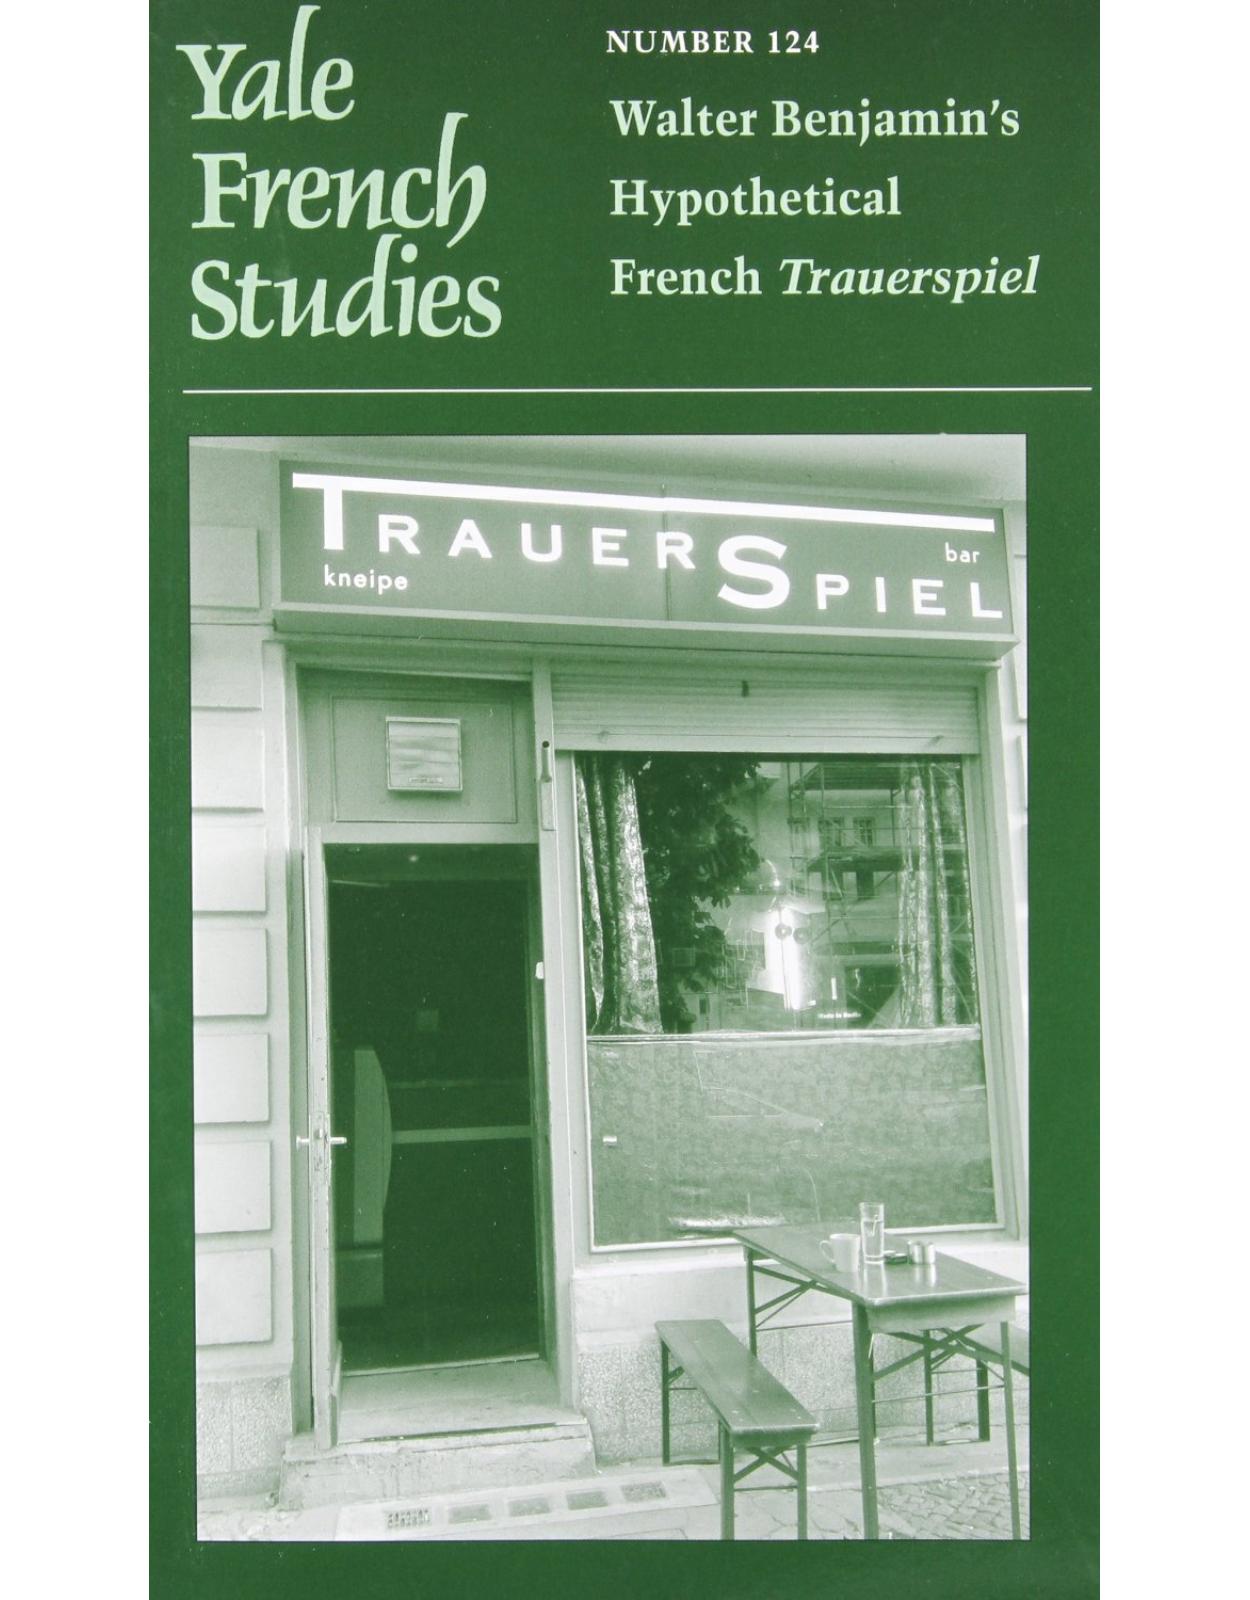 Walter Benjamin's Hypothetical French Trauerspiel. Yale French Studies, Volume 124